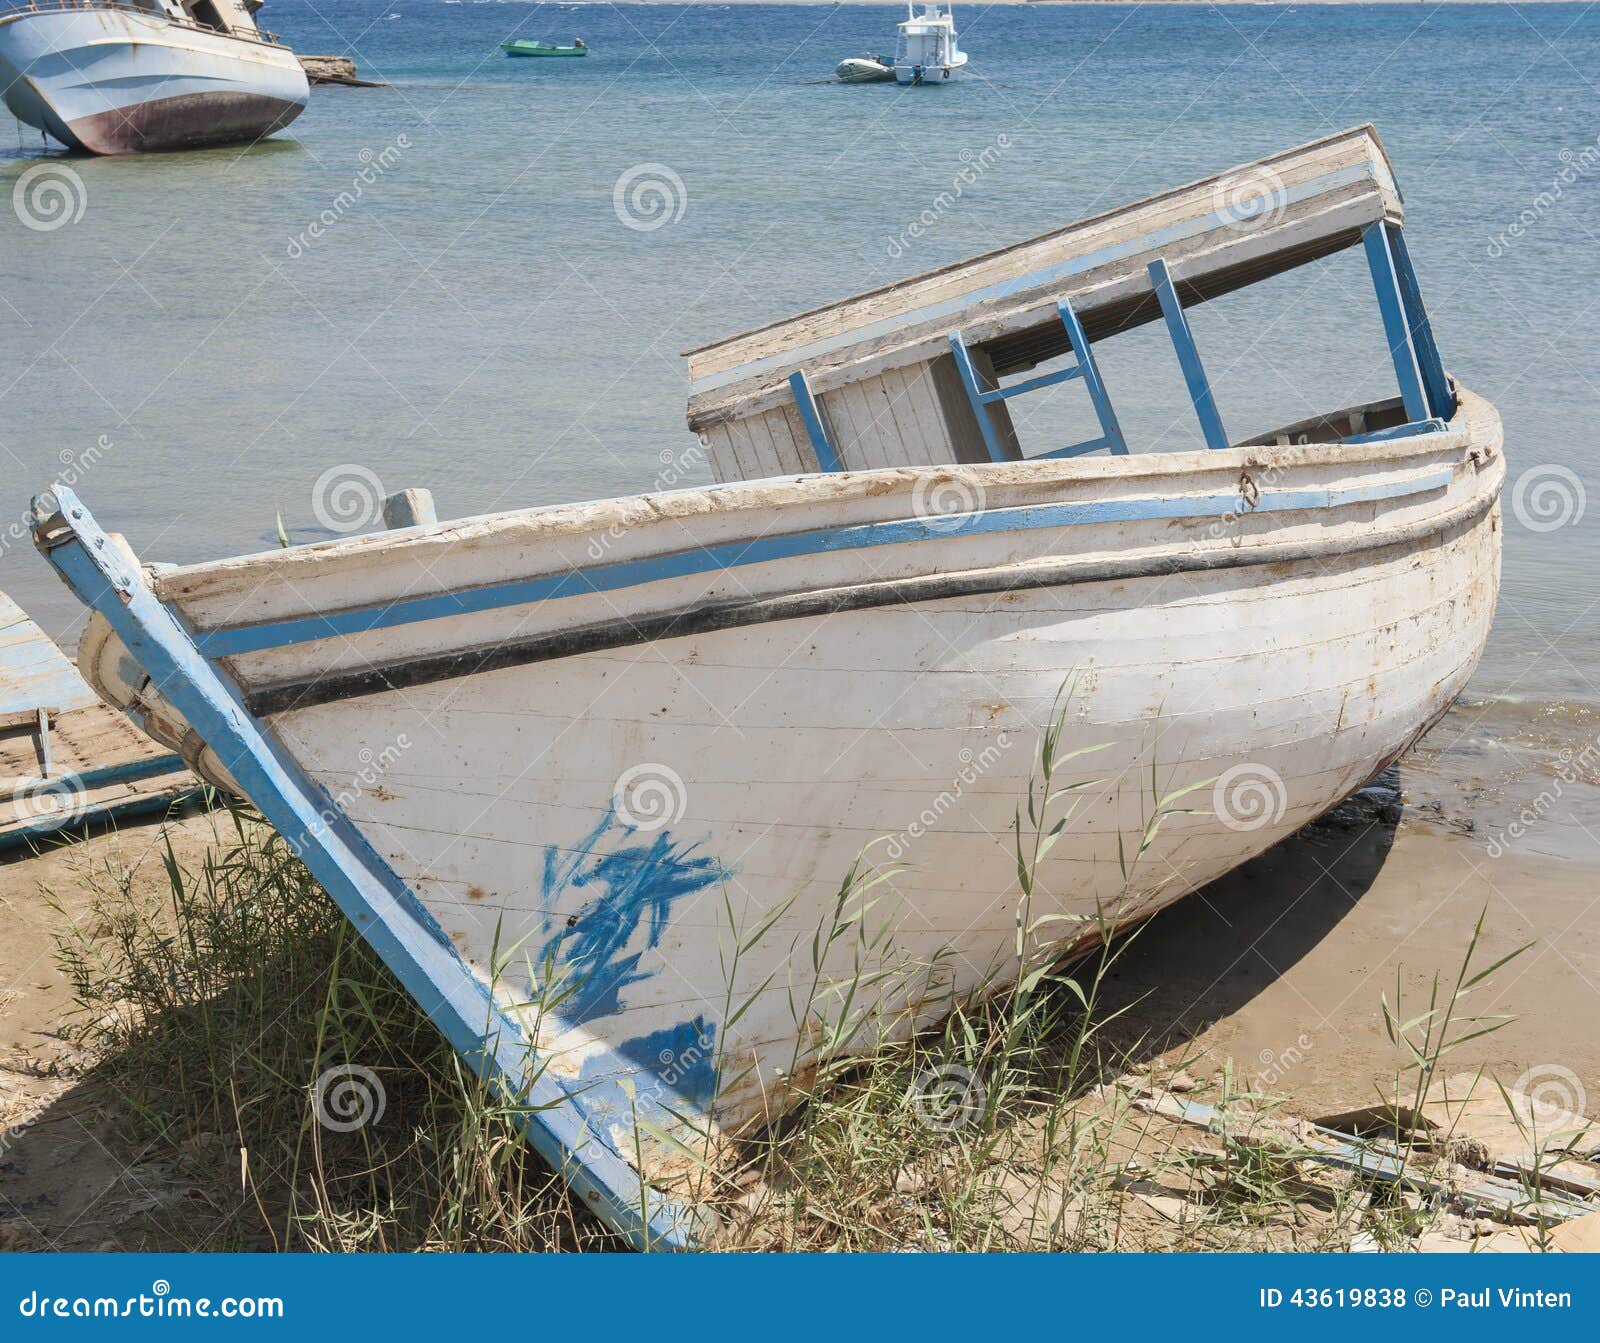 Old derelict boat abandoned on beach. Old derelict small boat abandoned on beach by coast